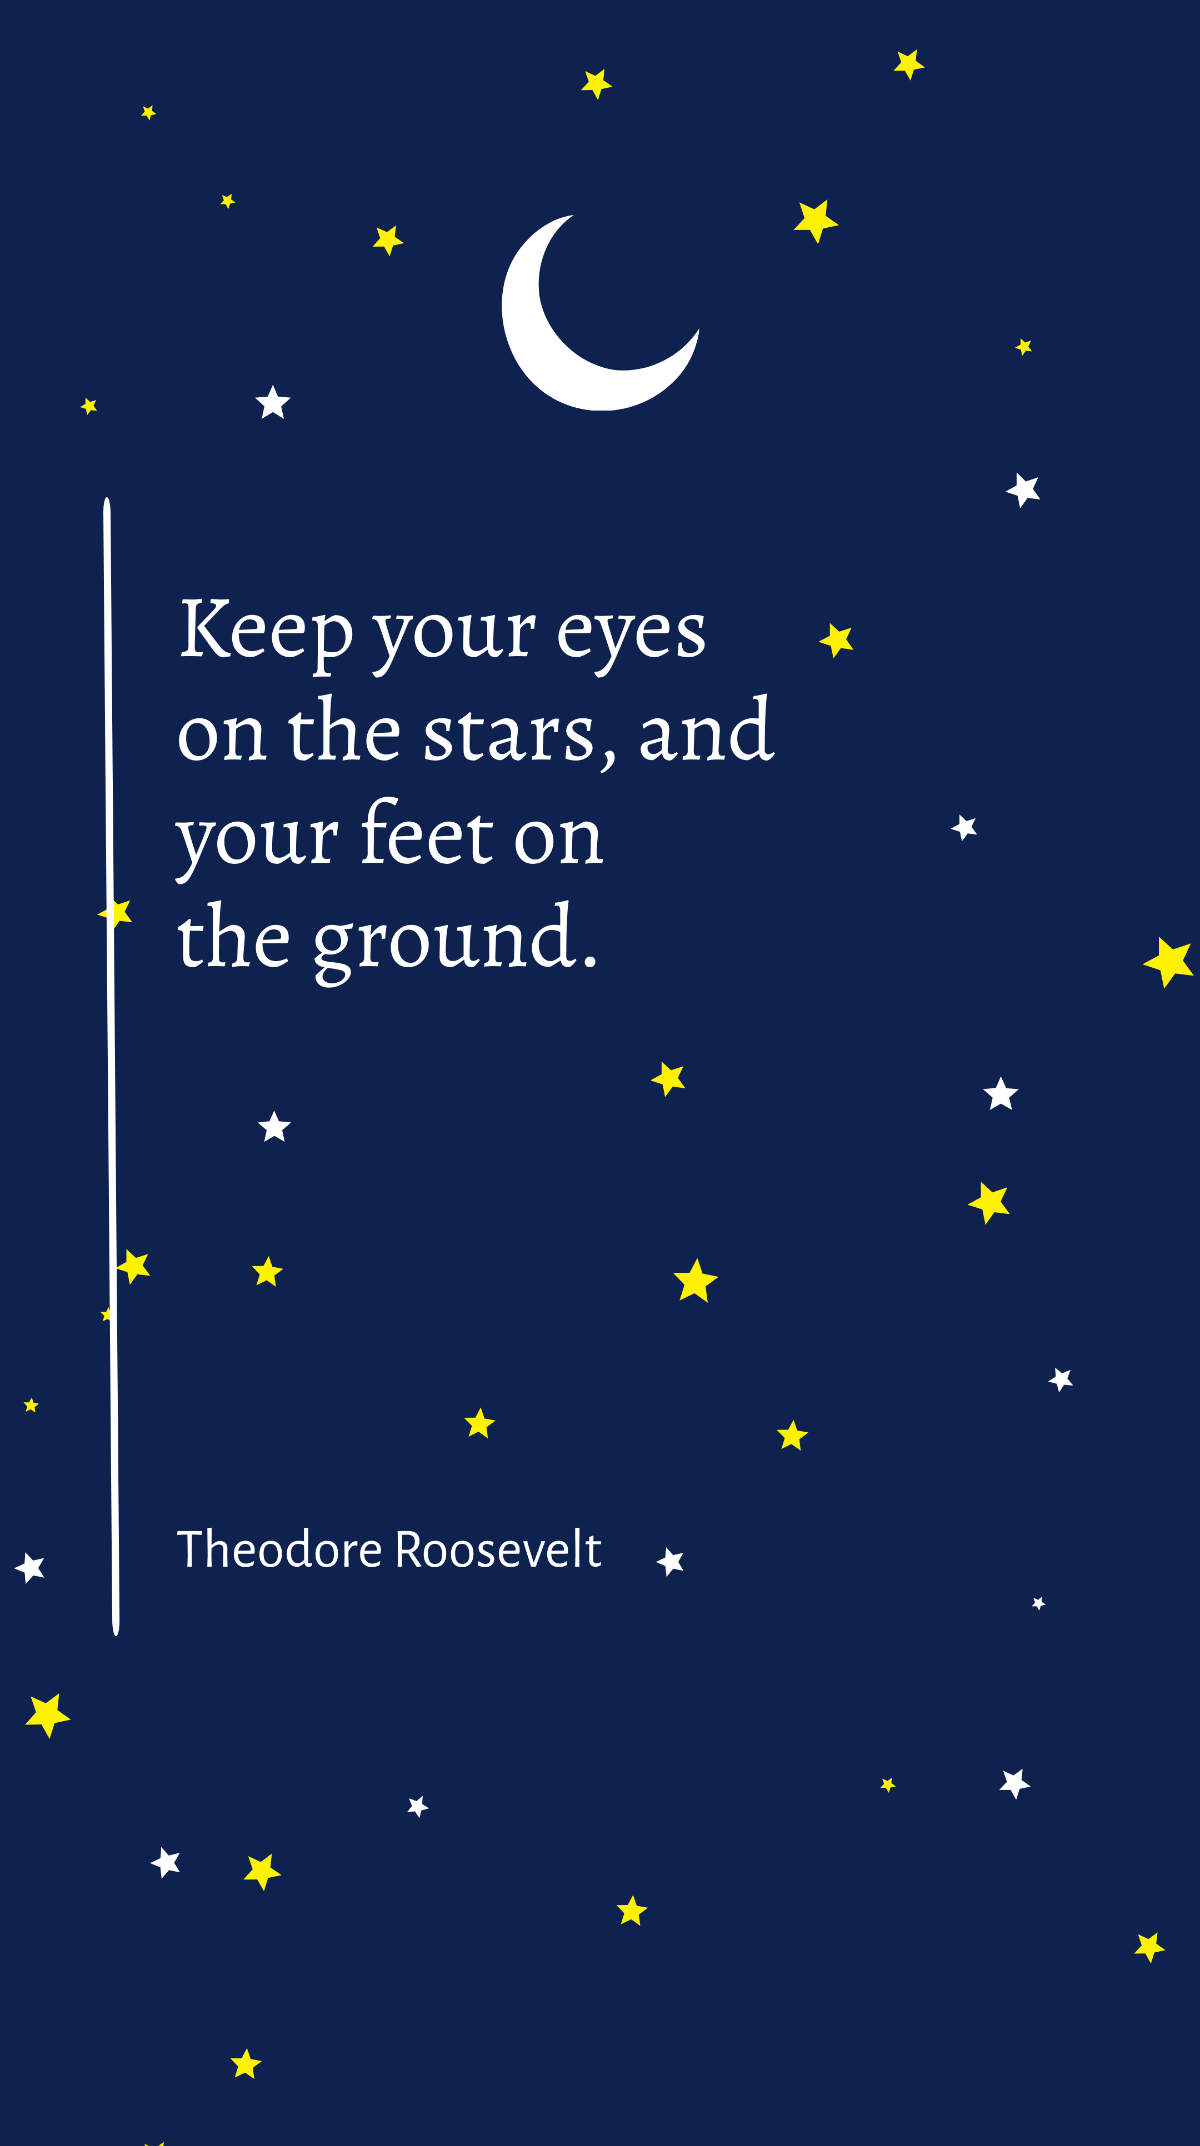 Theodore Roosevelt - Keep your eyes on the stars, and your feet on the ground. Template